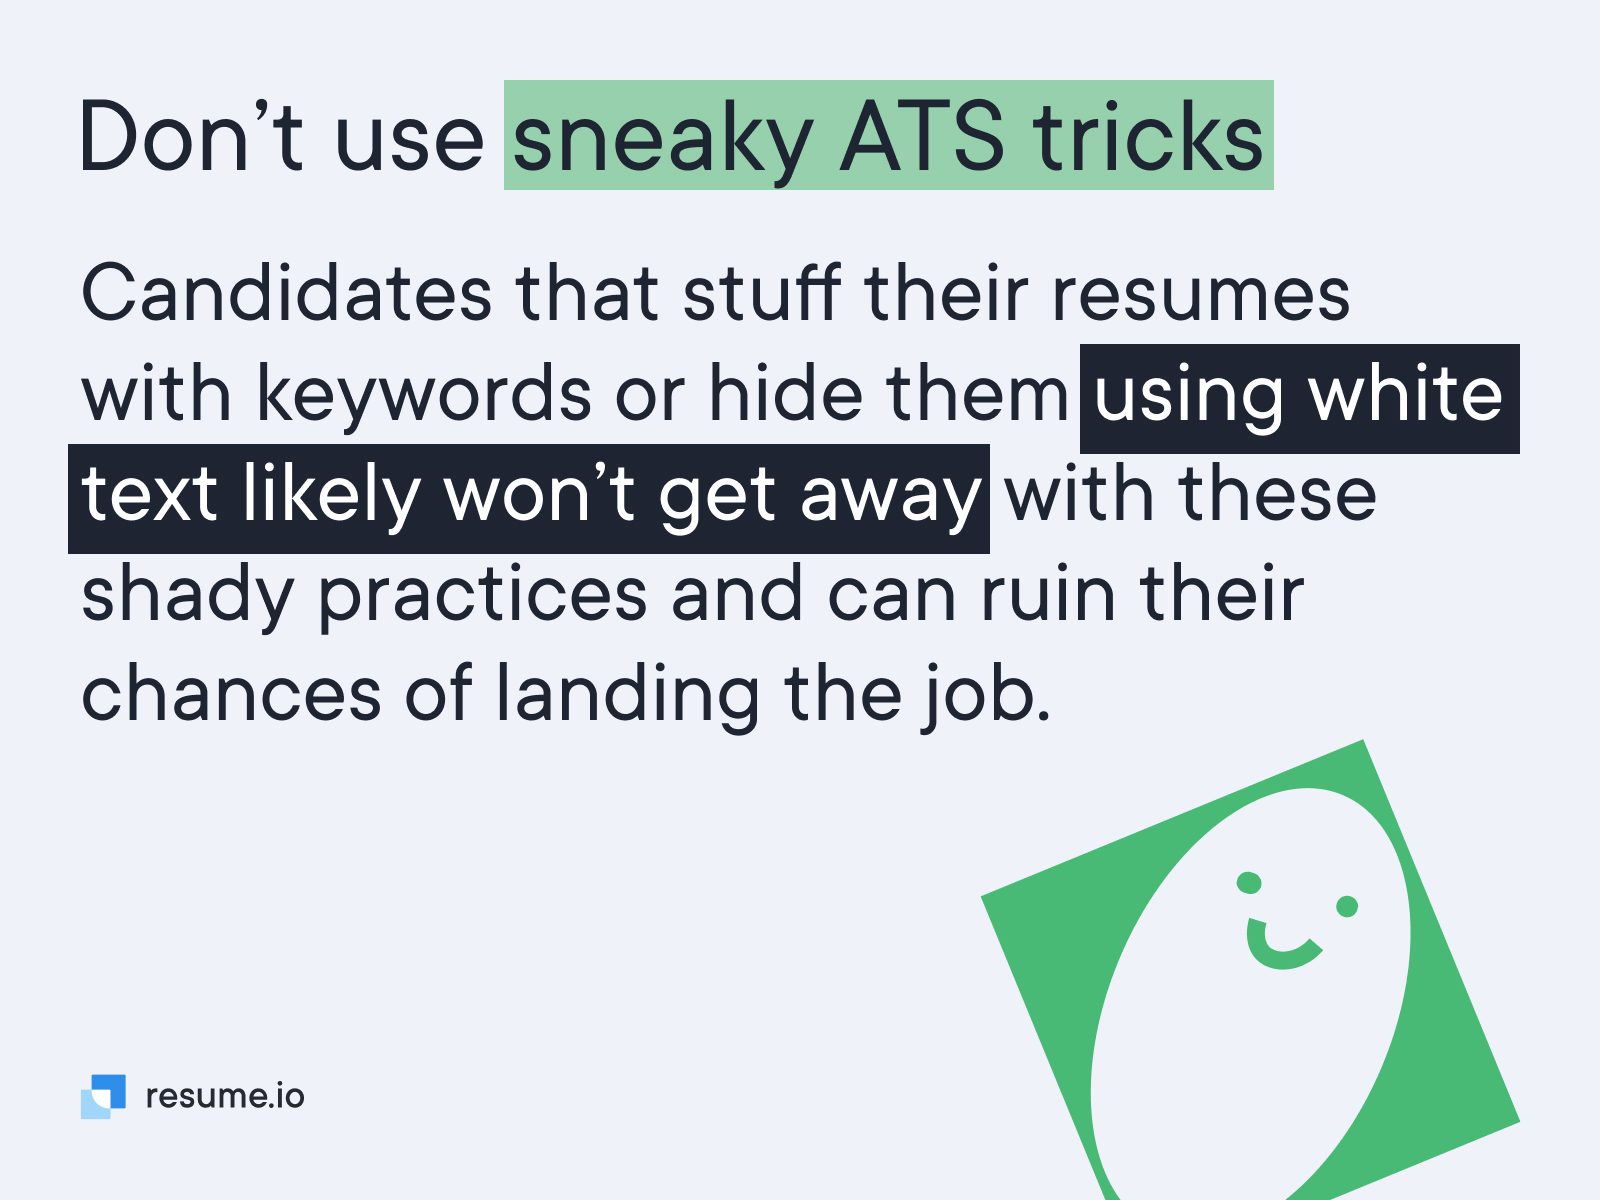 Don't use sneaky ATS tricks